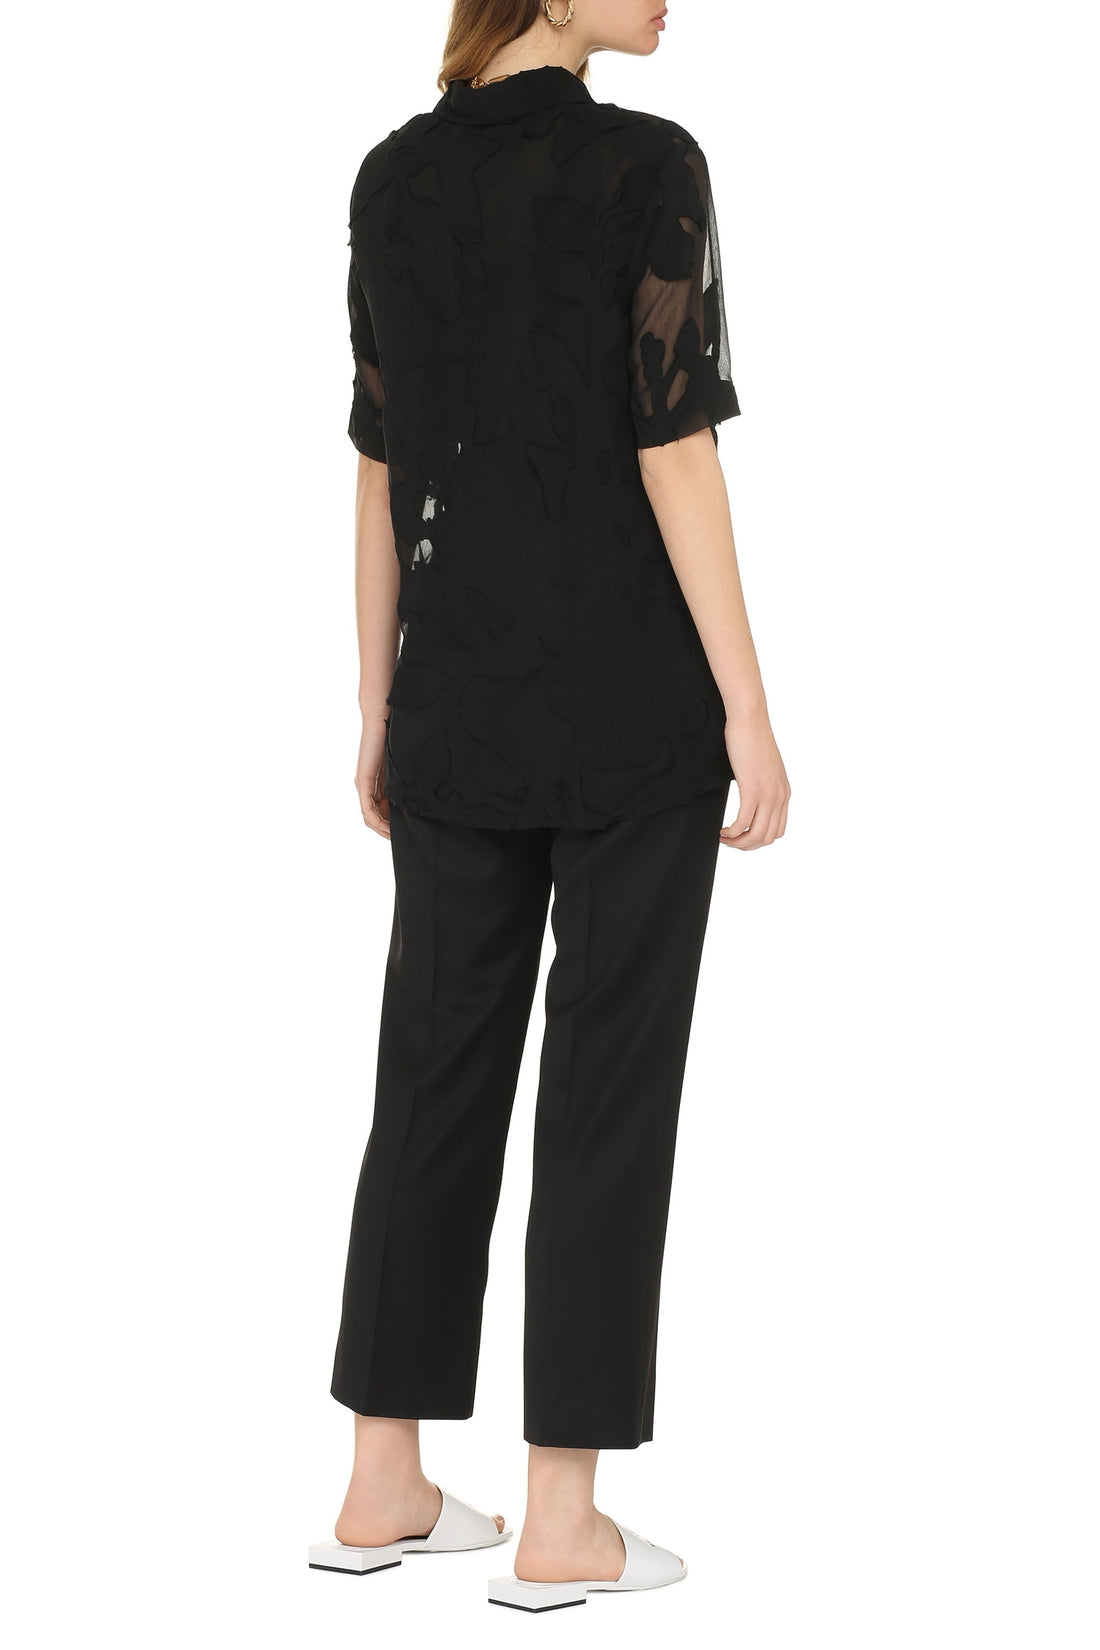 Rodebjer-OUTLET-SALE-Taddeo chiffon shirt-ARCHIVIST